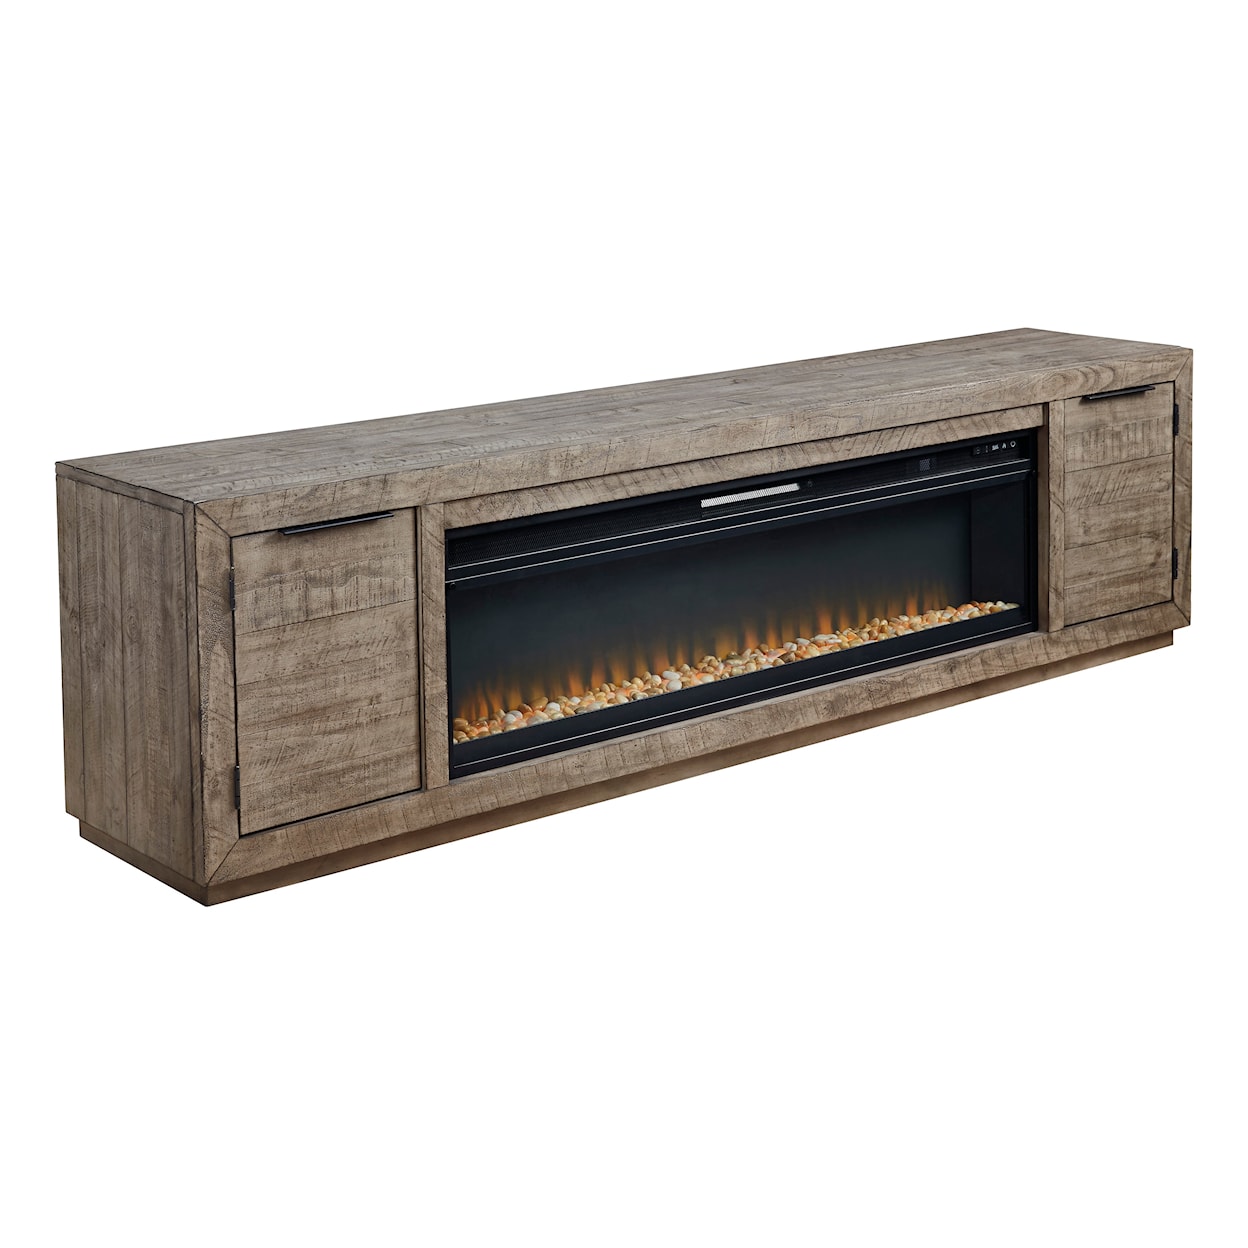 Benchcraft Krystanza TV Stand with Electric Fireplace